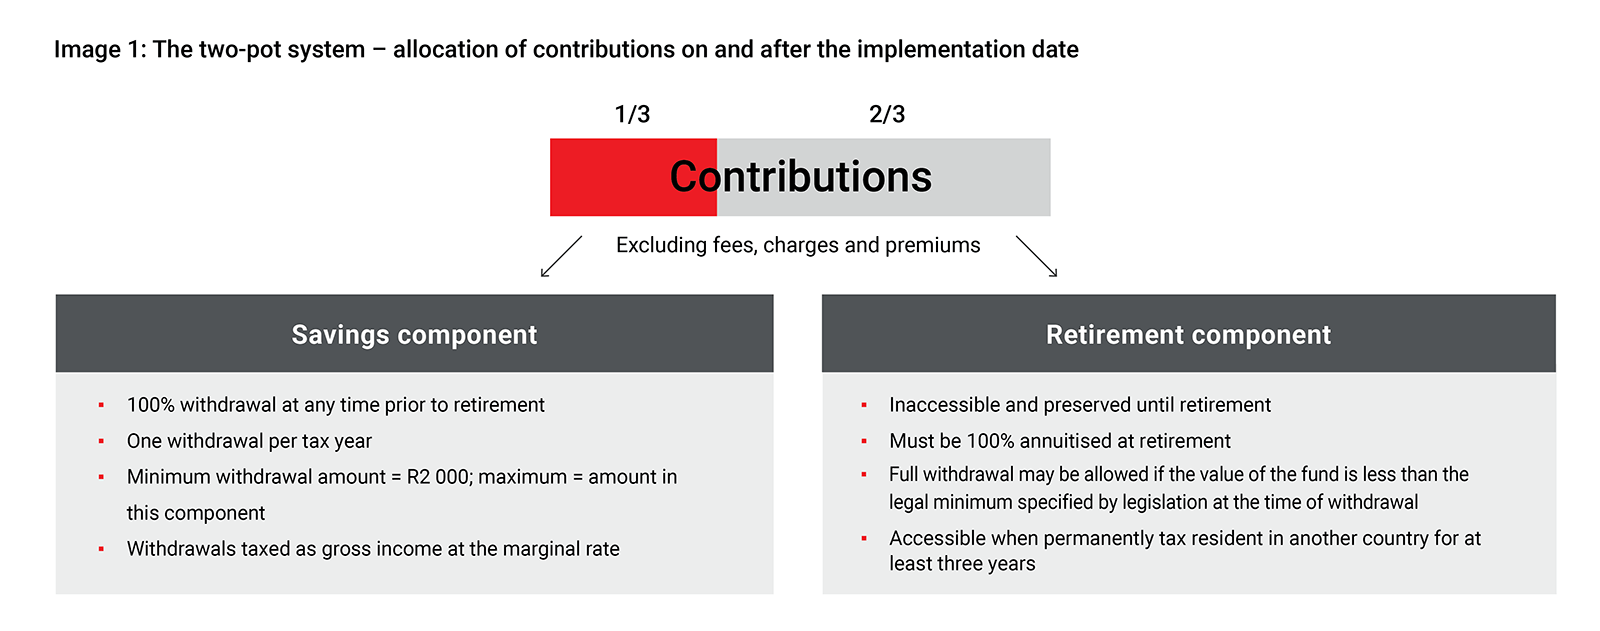 Image showing the allocation of contributions on and after the implementation date